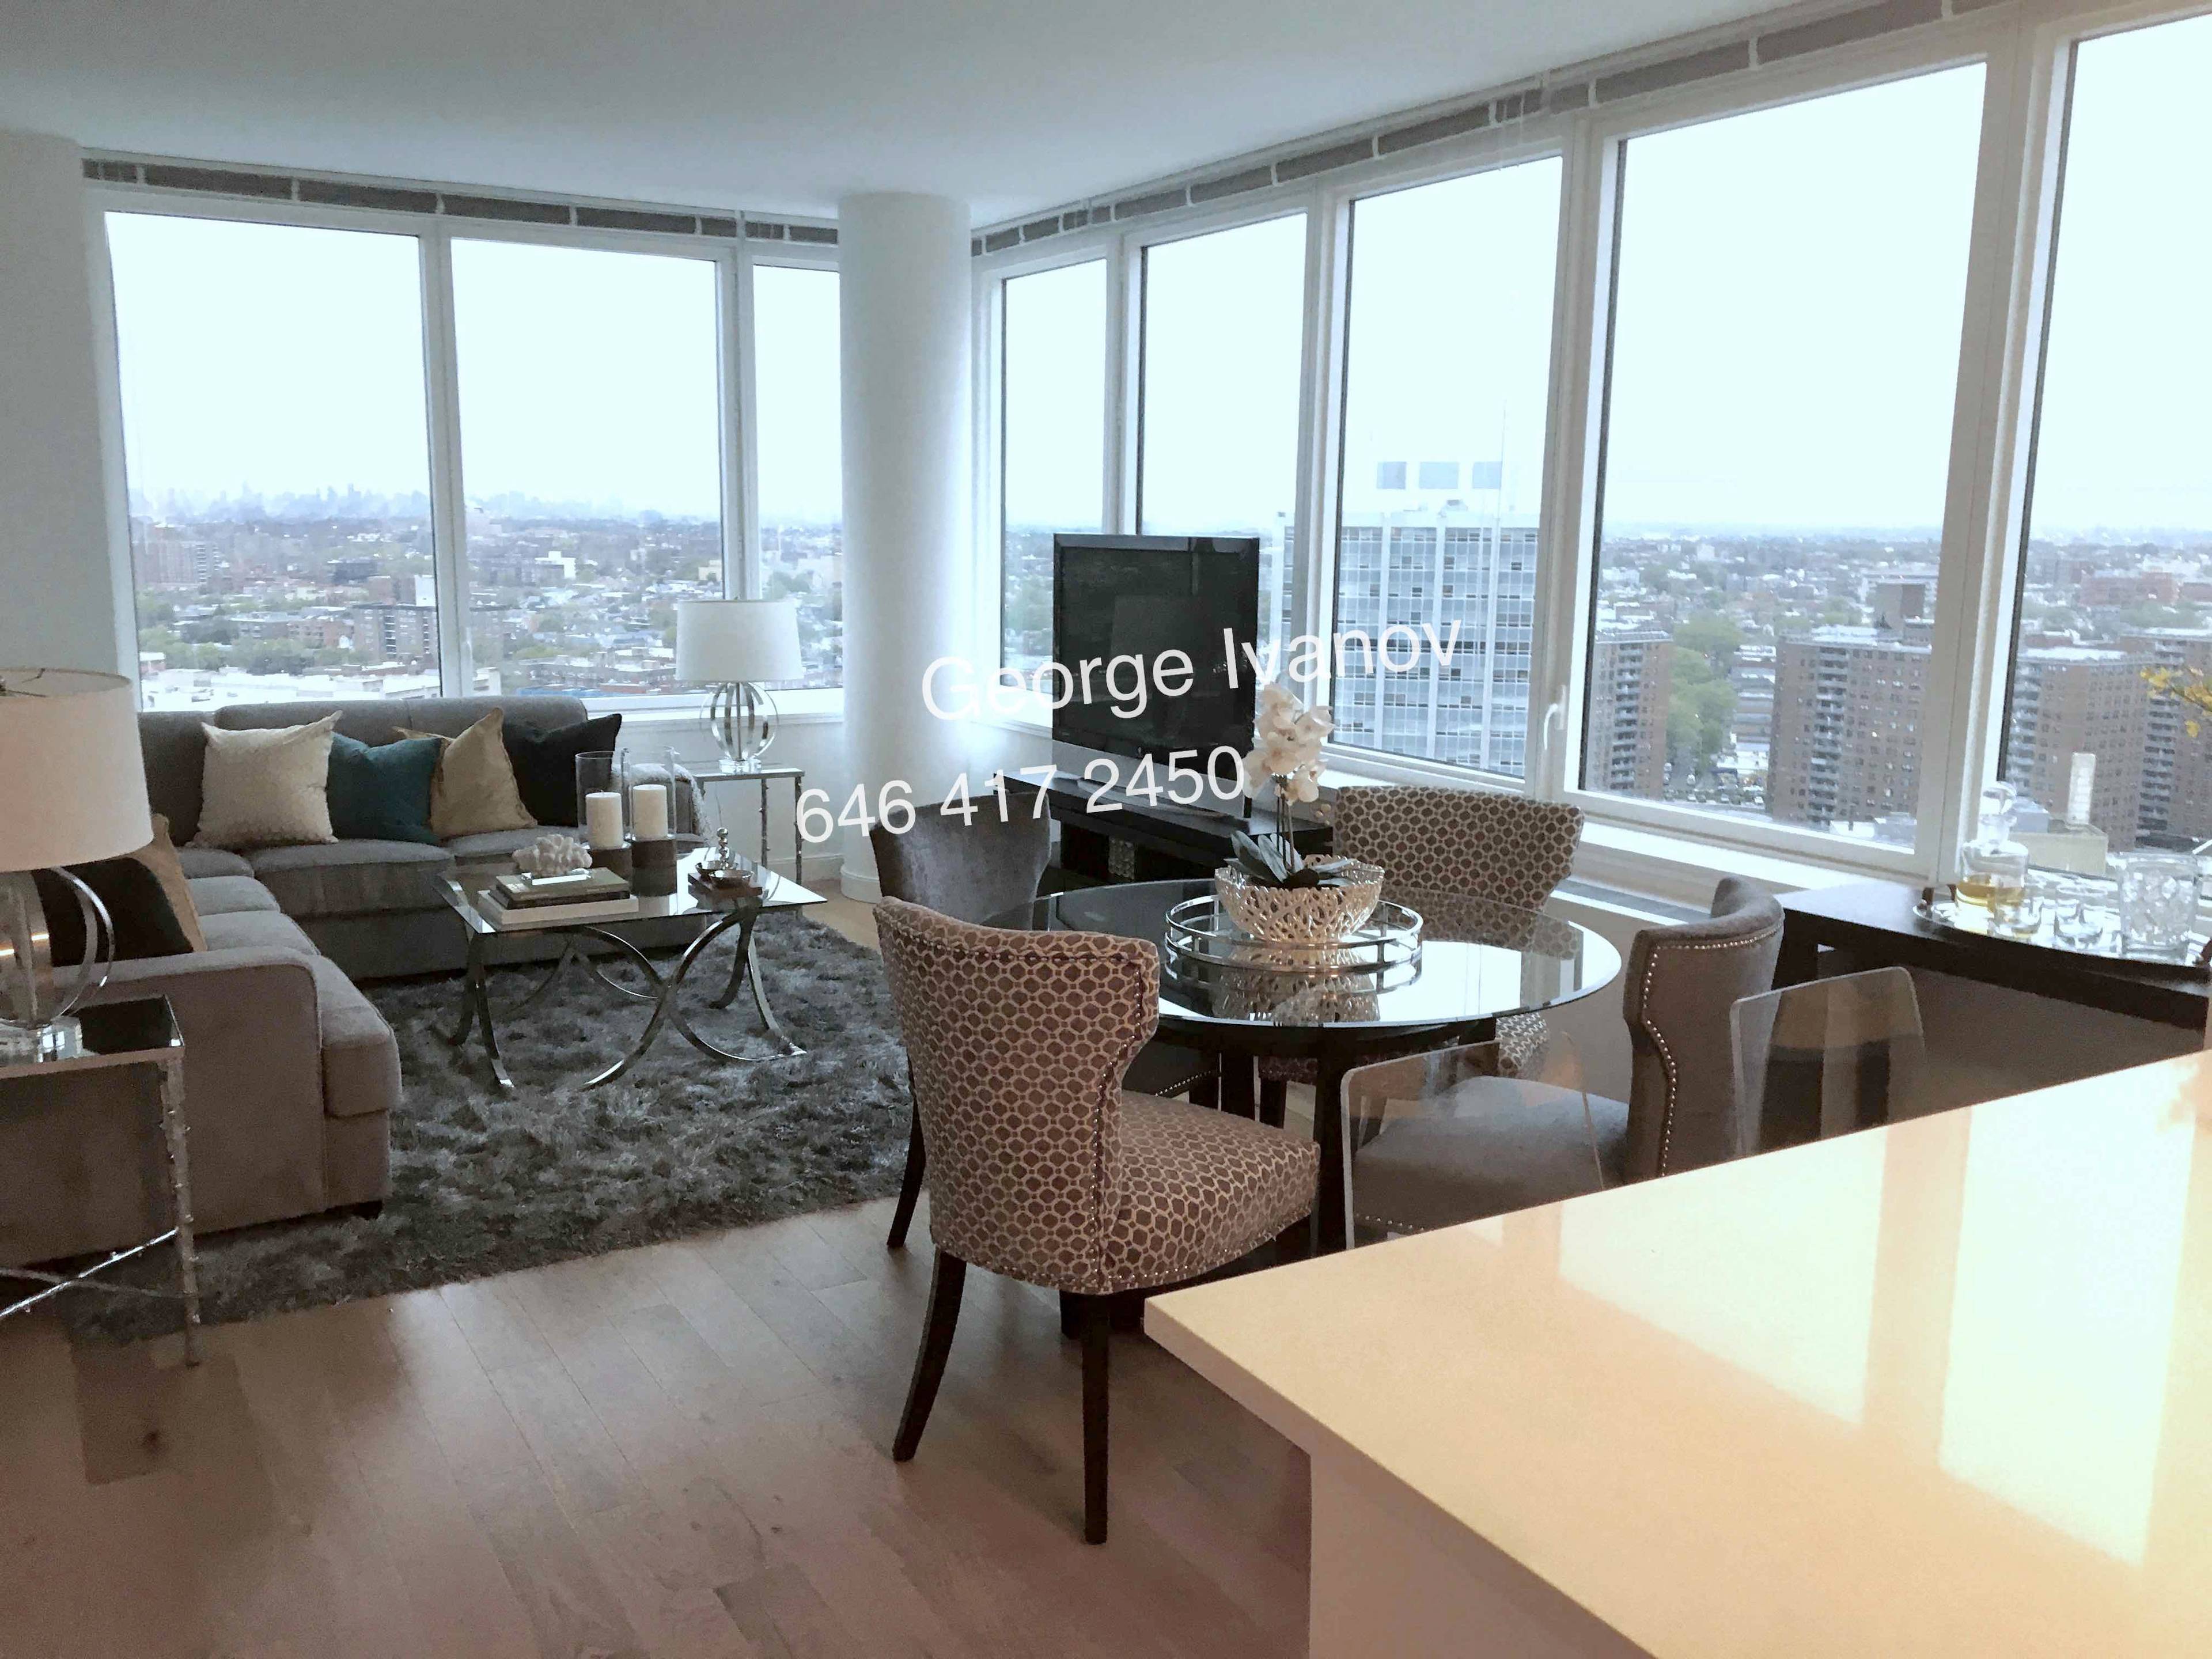 ★★★★★ NO FEE + FREE MONTH !!!  ULTRA LUXURY 2 BED / 2 BATH RESIDENCE - REGO PARK - 24hr Doorman- BEST QUALITY AND AMENITIES . MIN to MIDTOWN MANHATTAN ★★★★